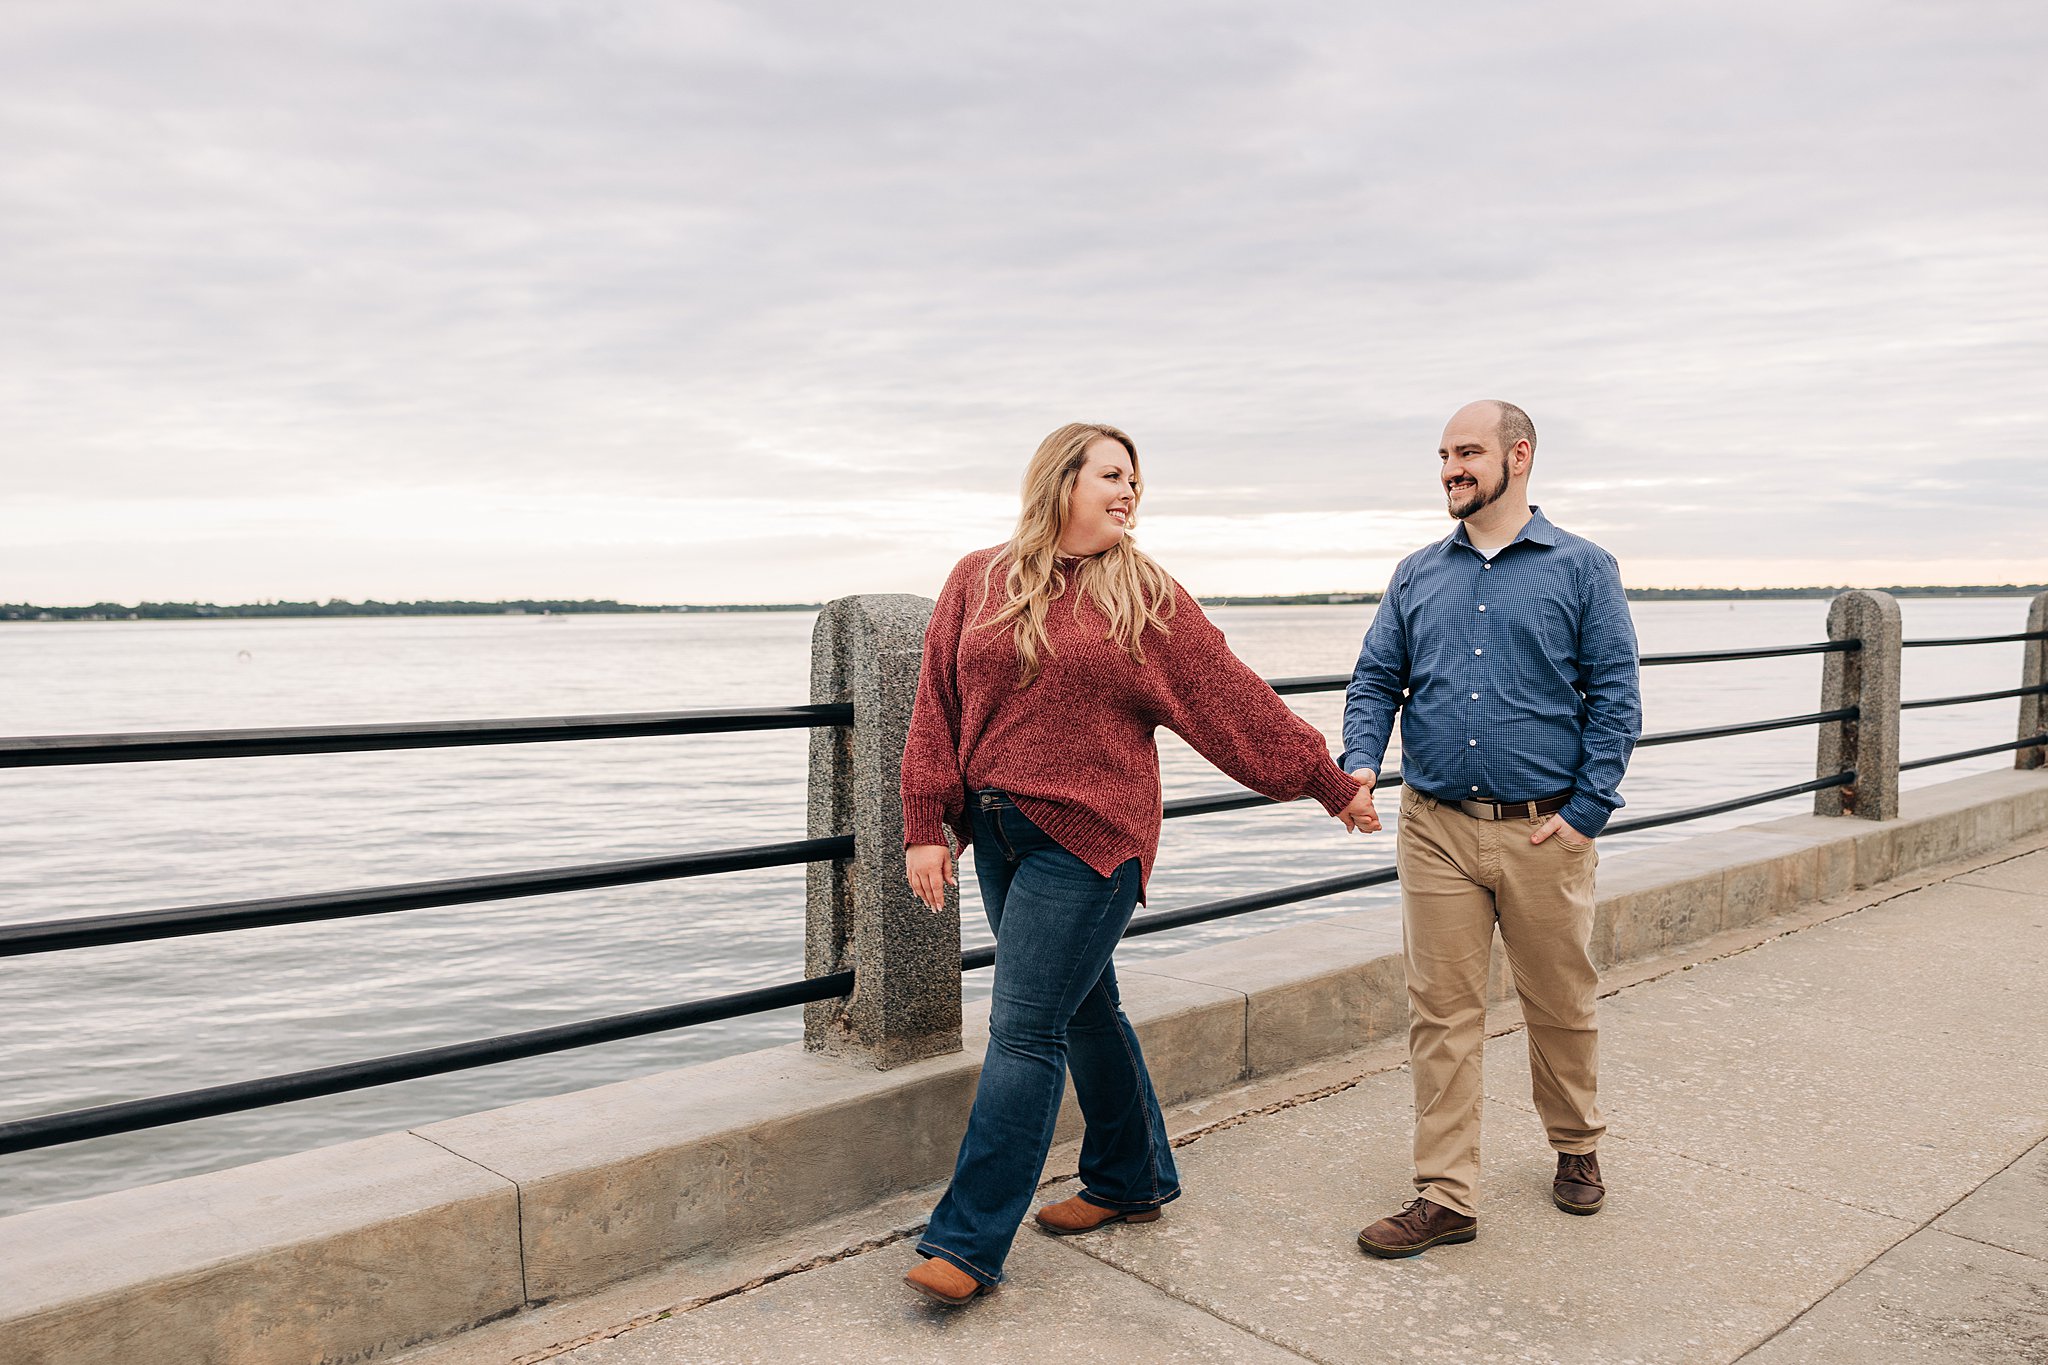 A woman in a red sweater leads her fiancee across a riverfront walkway